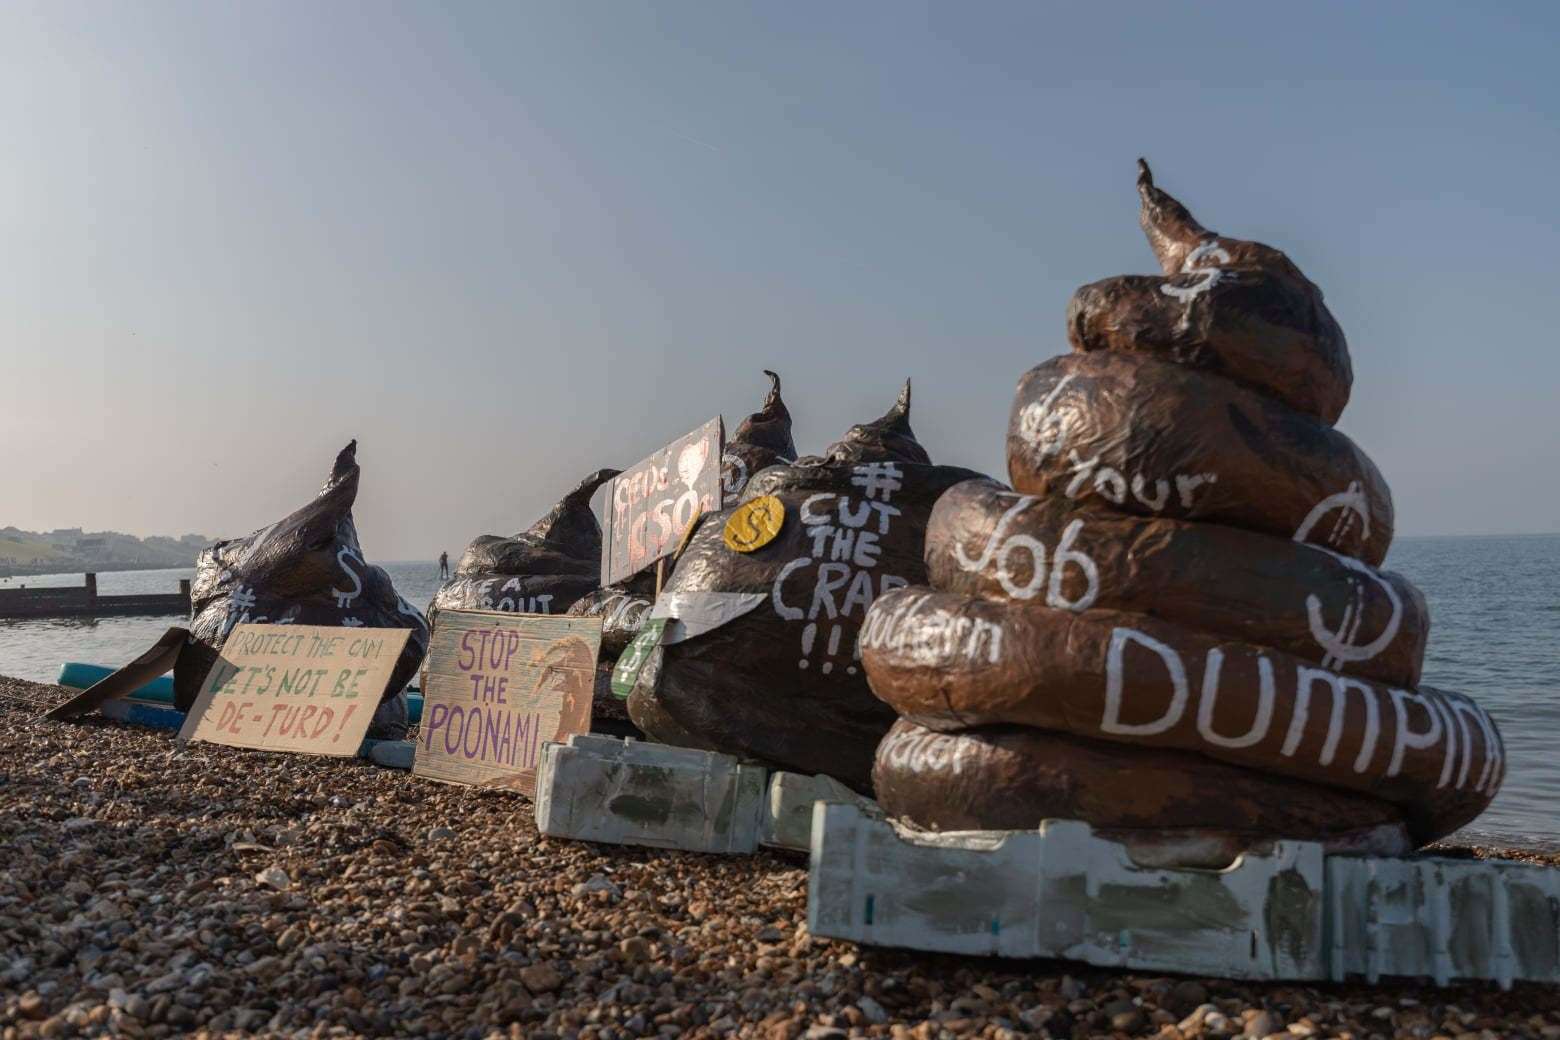 Protestors in Whitstable call for Southern Water to stop discharging sewage into the sea, at an event on Saturday, October 9. Picture: Andrew Hastings